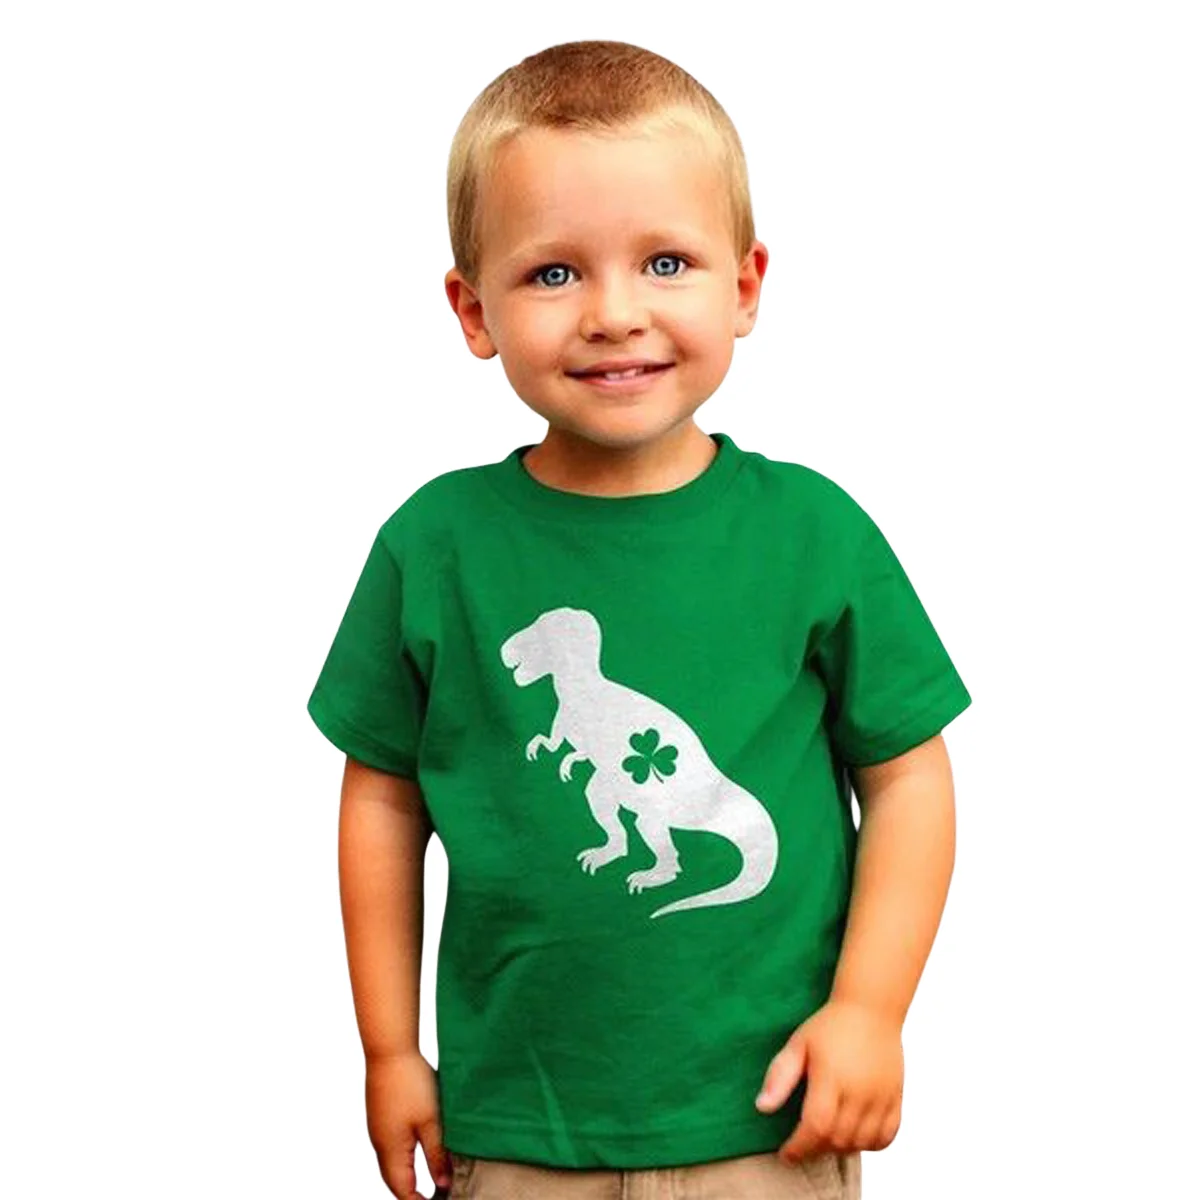 Lucky Dinosaur Patrick's Day Green Tshirt Luckest Boys Girls Kids White T-shirts First St Patricks Day Clothes Fashion Tops Tee